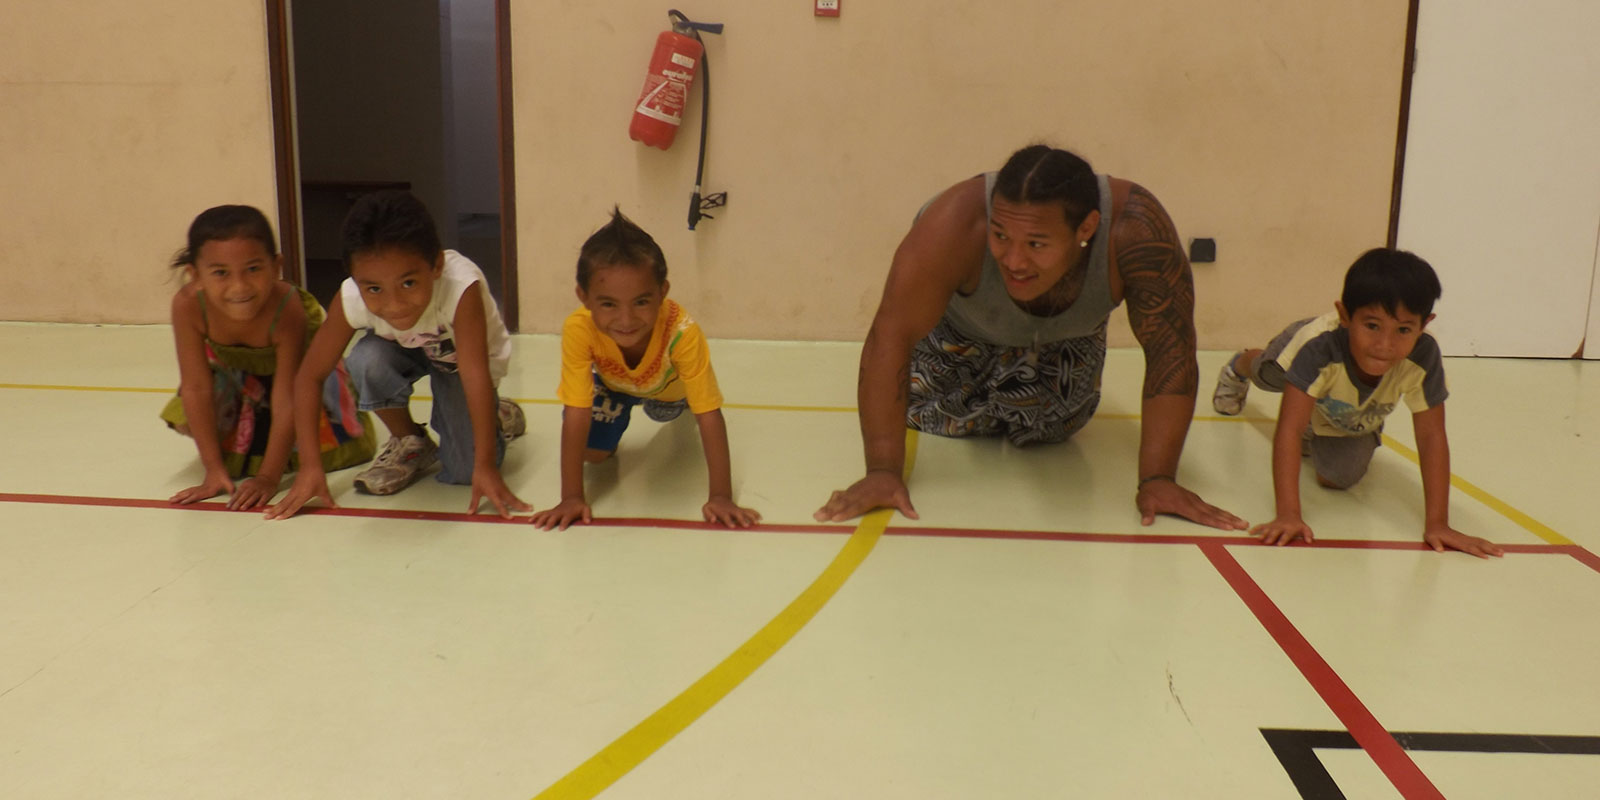 a young man crouches on the ground of a gymnasium with several children